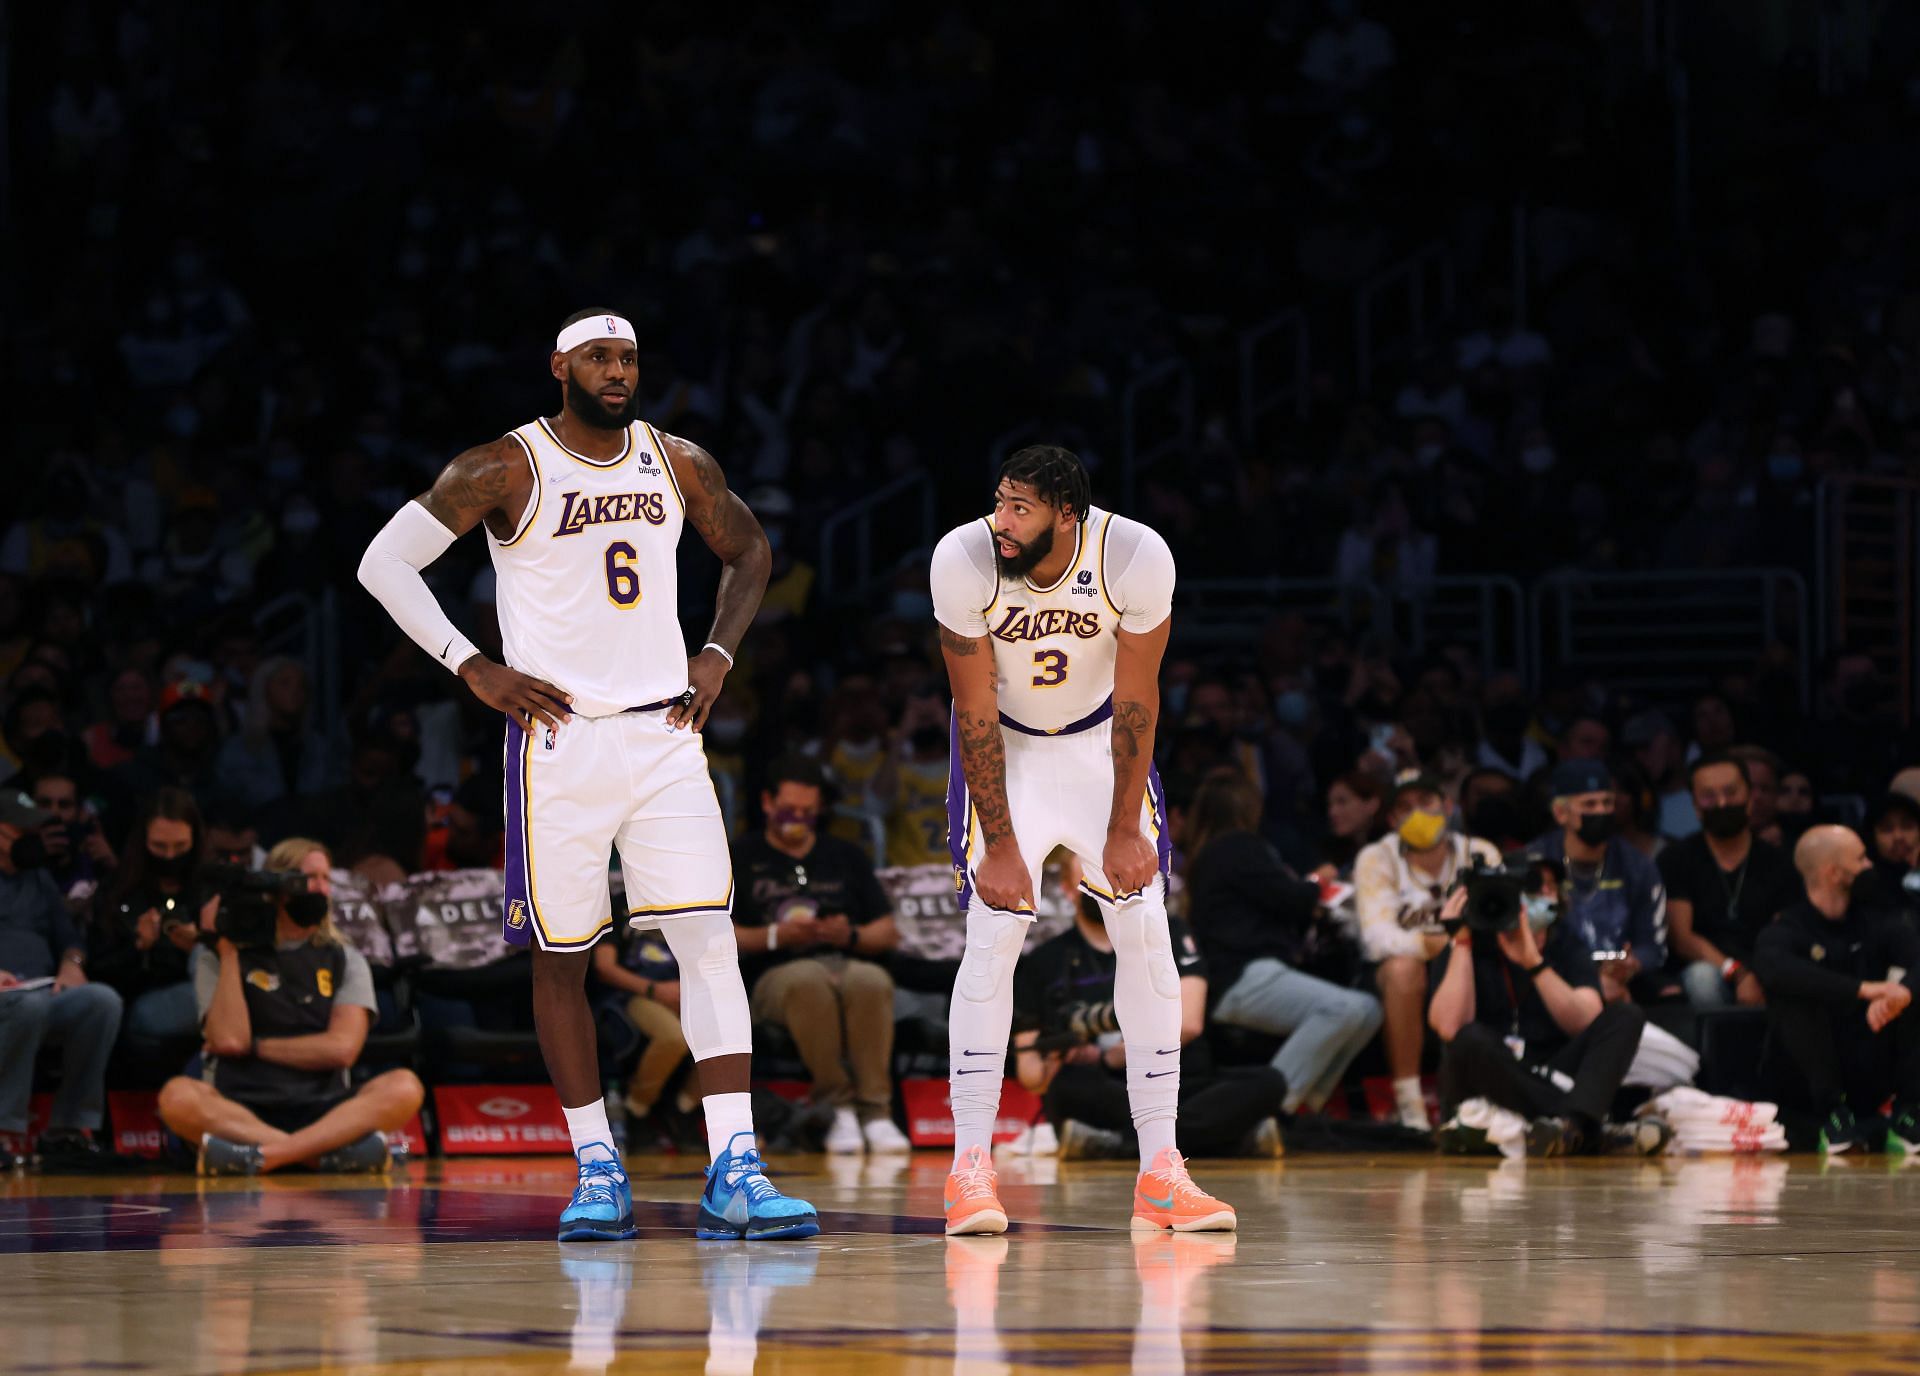 &lt;a href=&#039;https://www.sportskeeda.com/basketball/anthony-davis&#039; target=&#039;_blank&#039; rel=&#039;noopener noreferrer&#039;&gt;Anthony Davis&lt;/a&gt; will have to step up for the Lakers with Russell Westbrook struggling